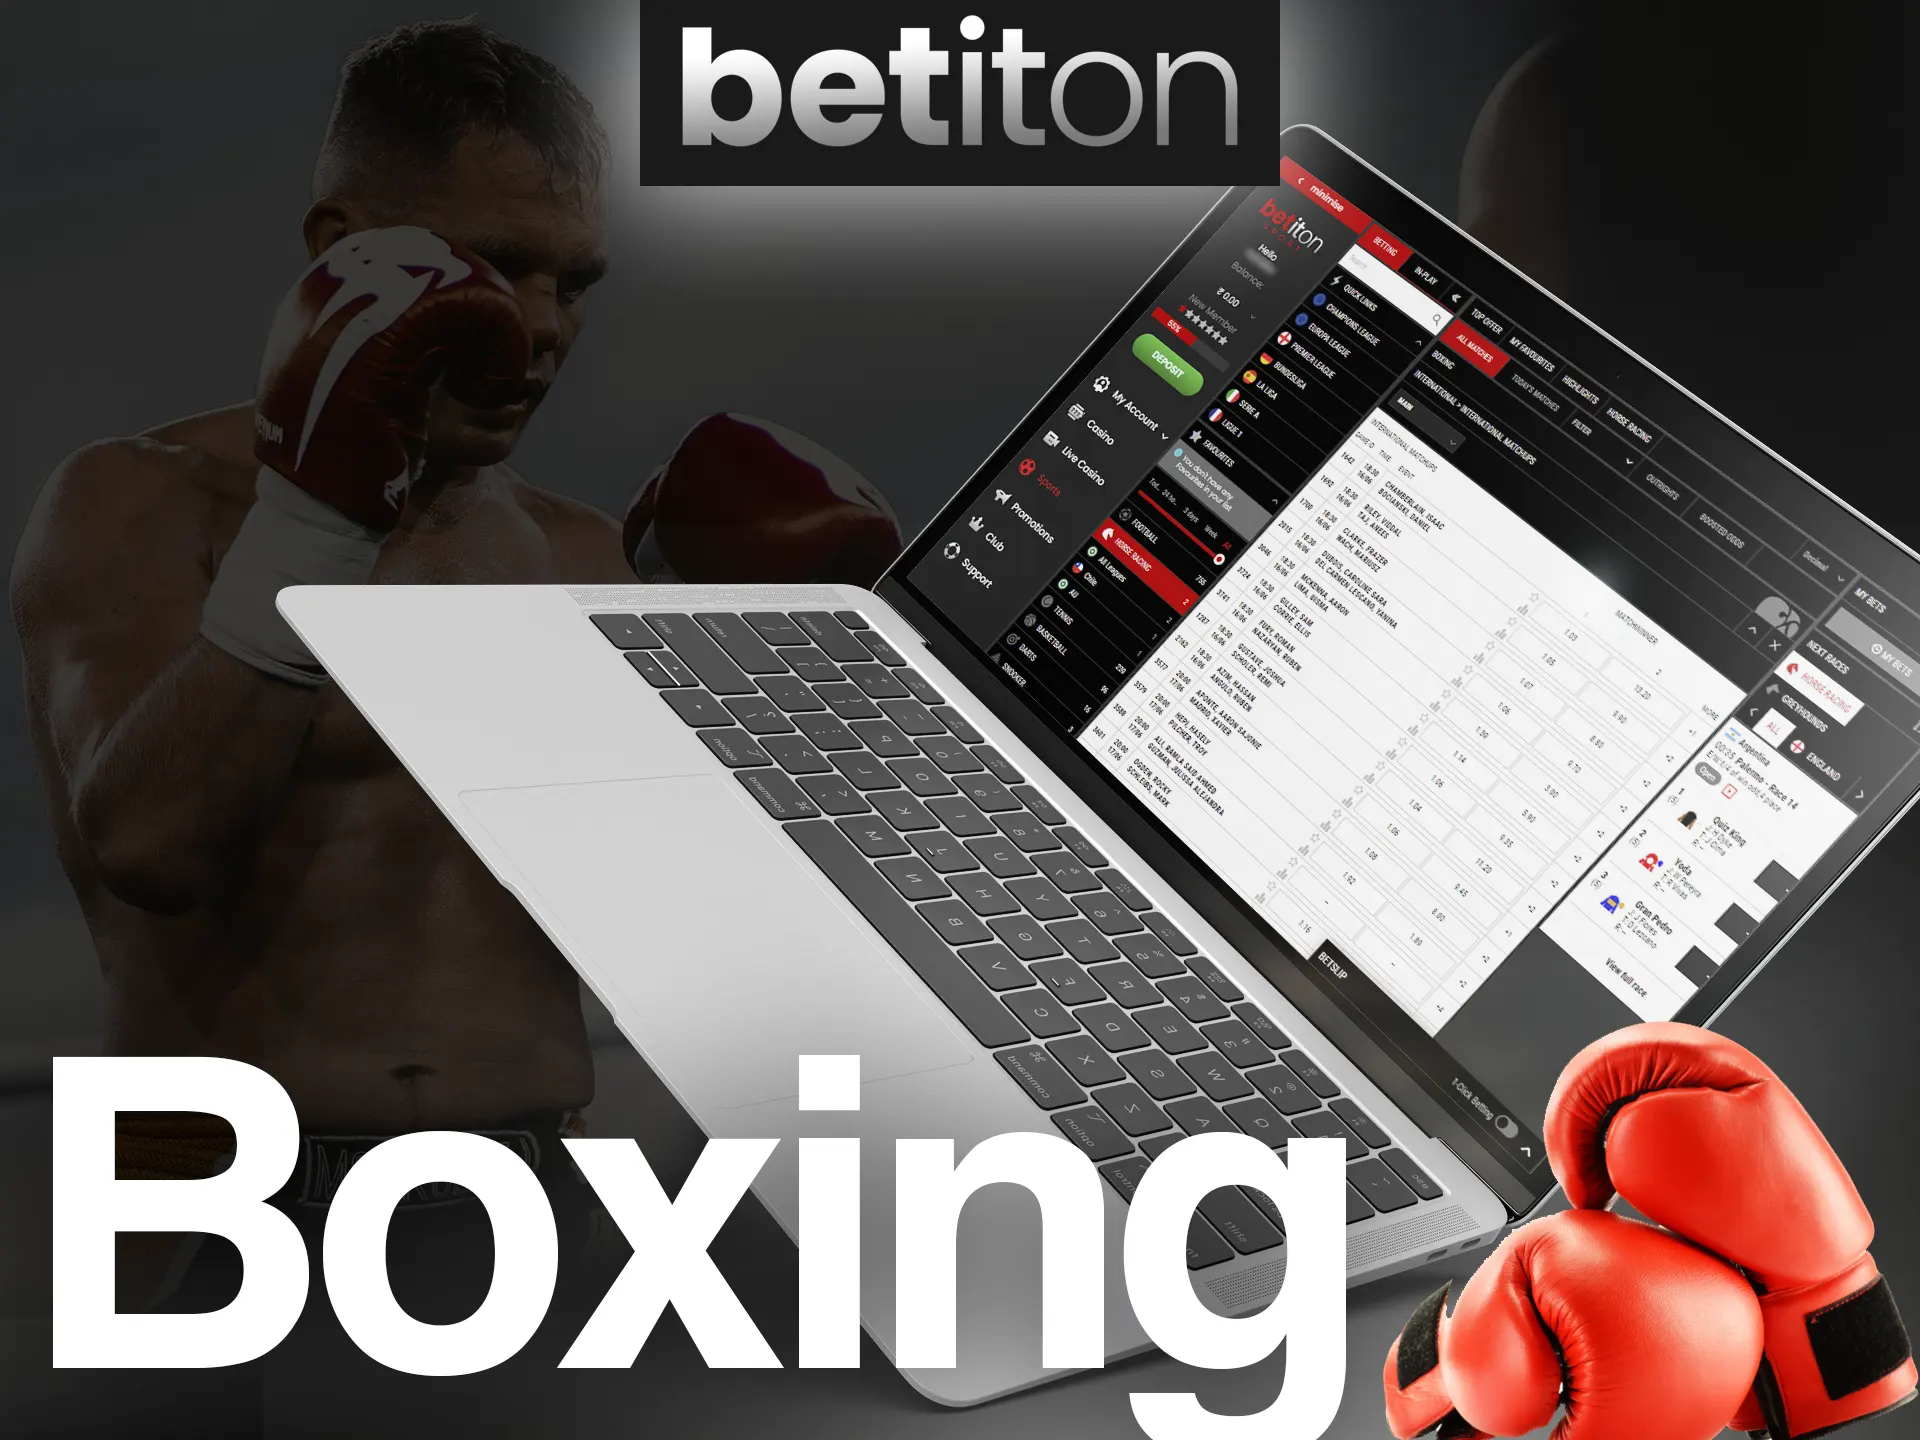 Bet on your favorite boxing fighters at the Betiton.